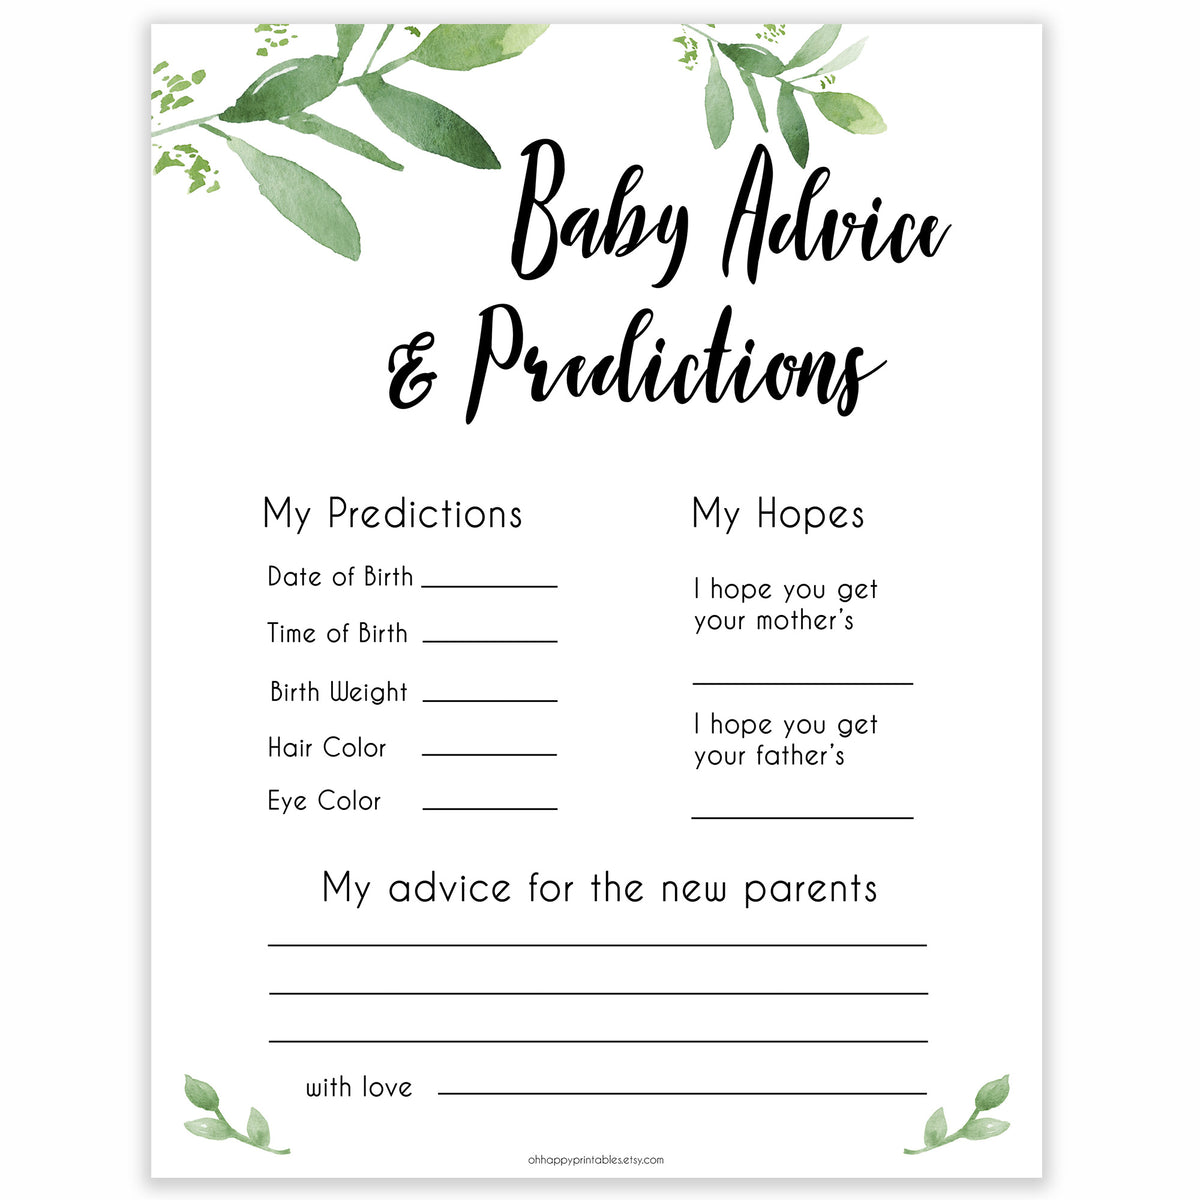 free-printable-baby-shower-prediction-cards-baby-shower-game-baby